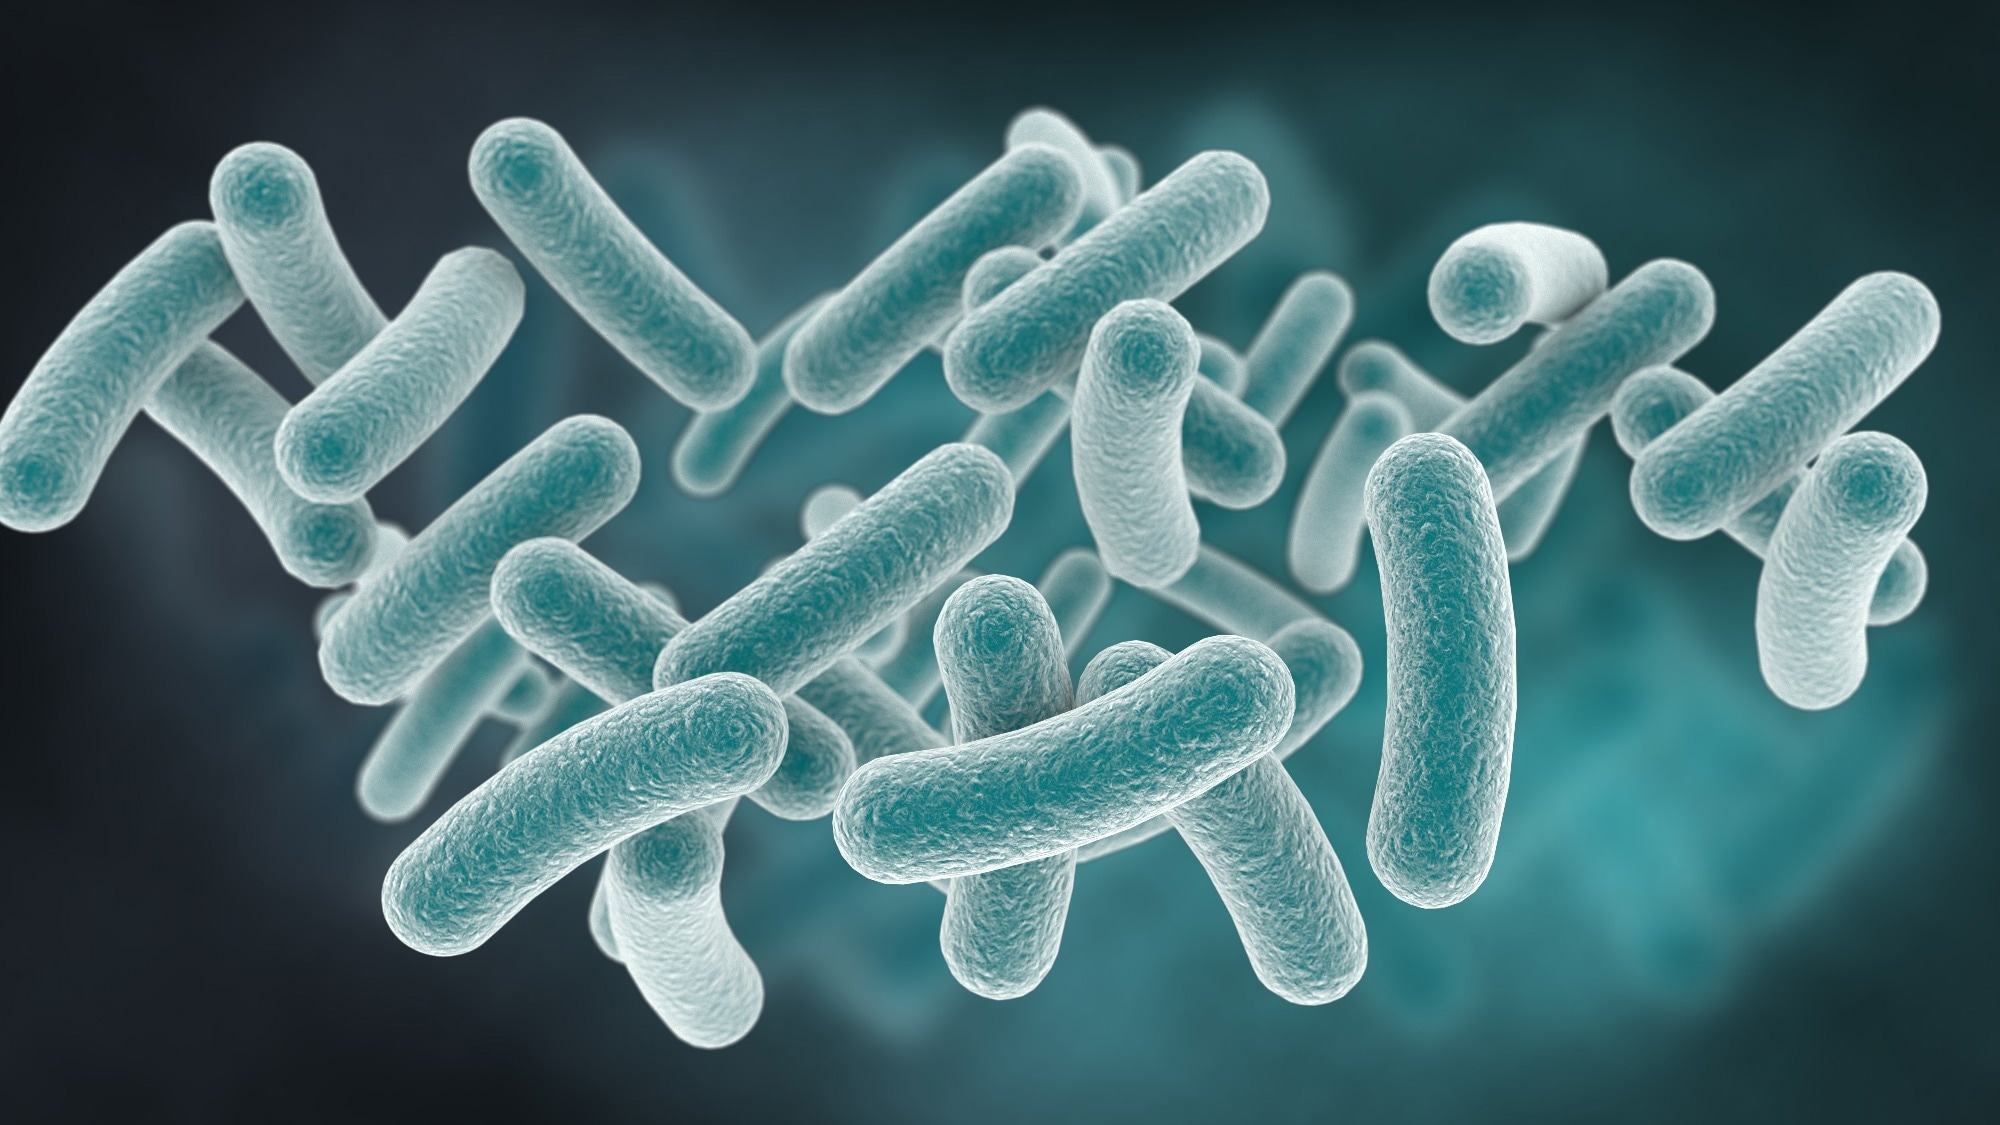 Study: A survey on antimicrobial resistance genes of frequently used probiotic bacteria, 1901 to 2022. Image Credit: MilletStudio / Shutterstock.com